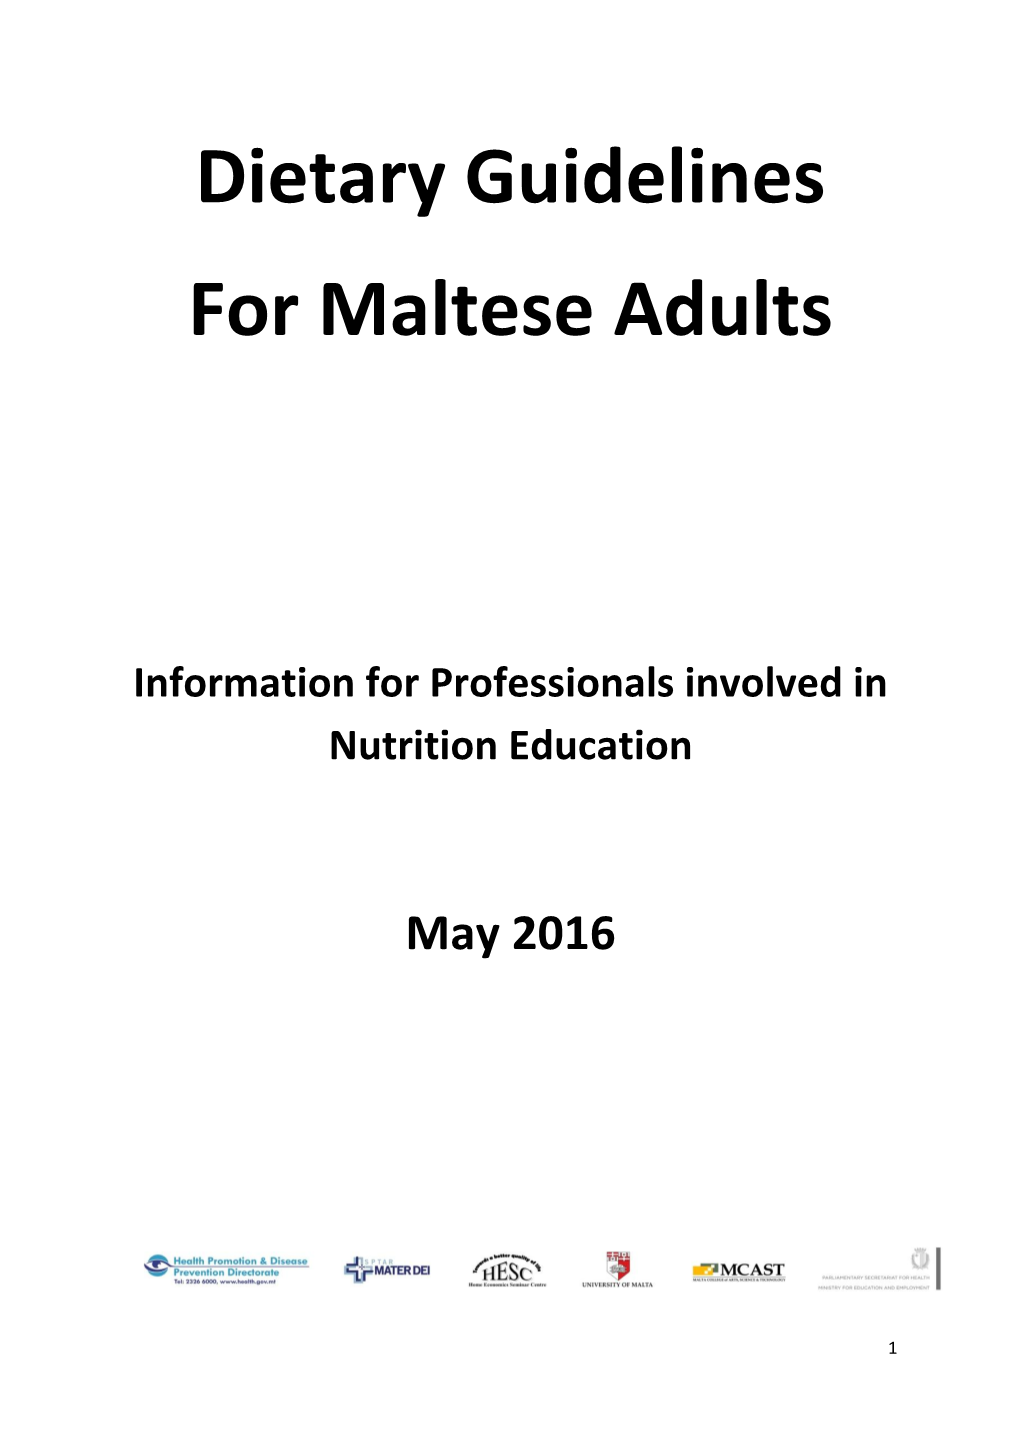 Dietary Guidelines for Maltese Adults